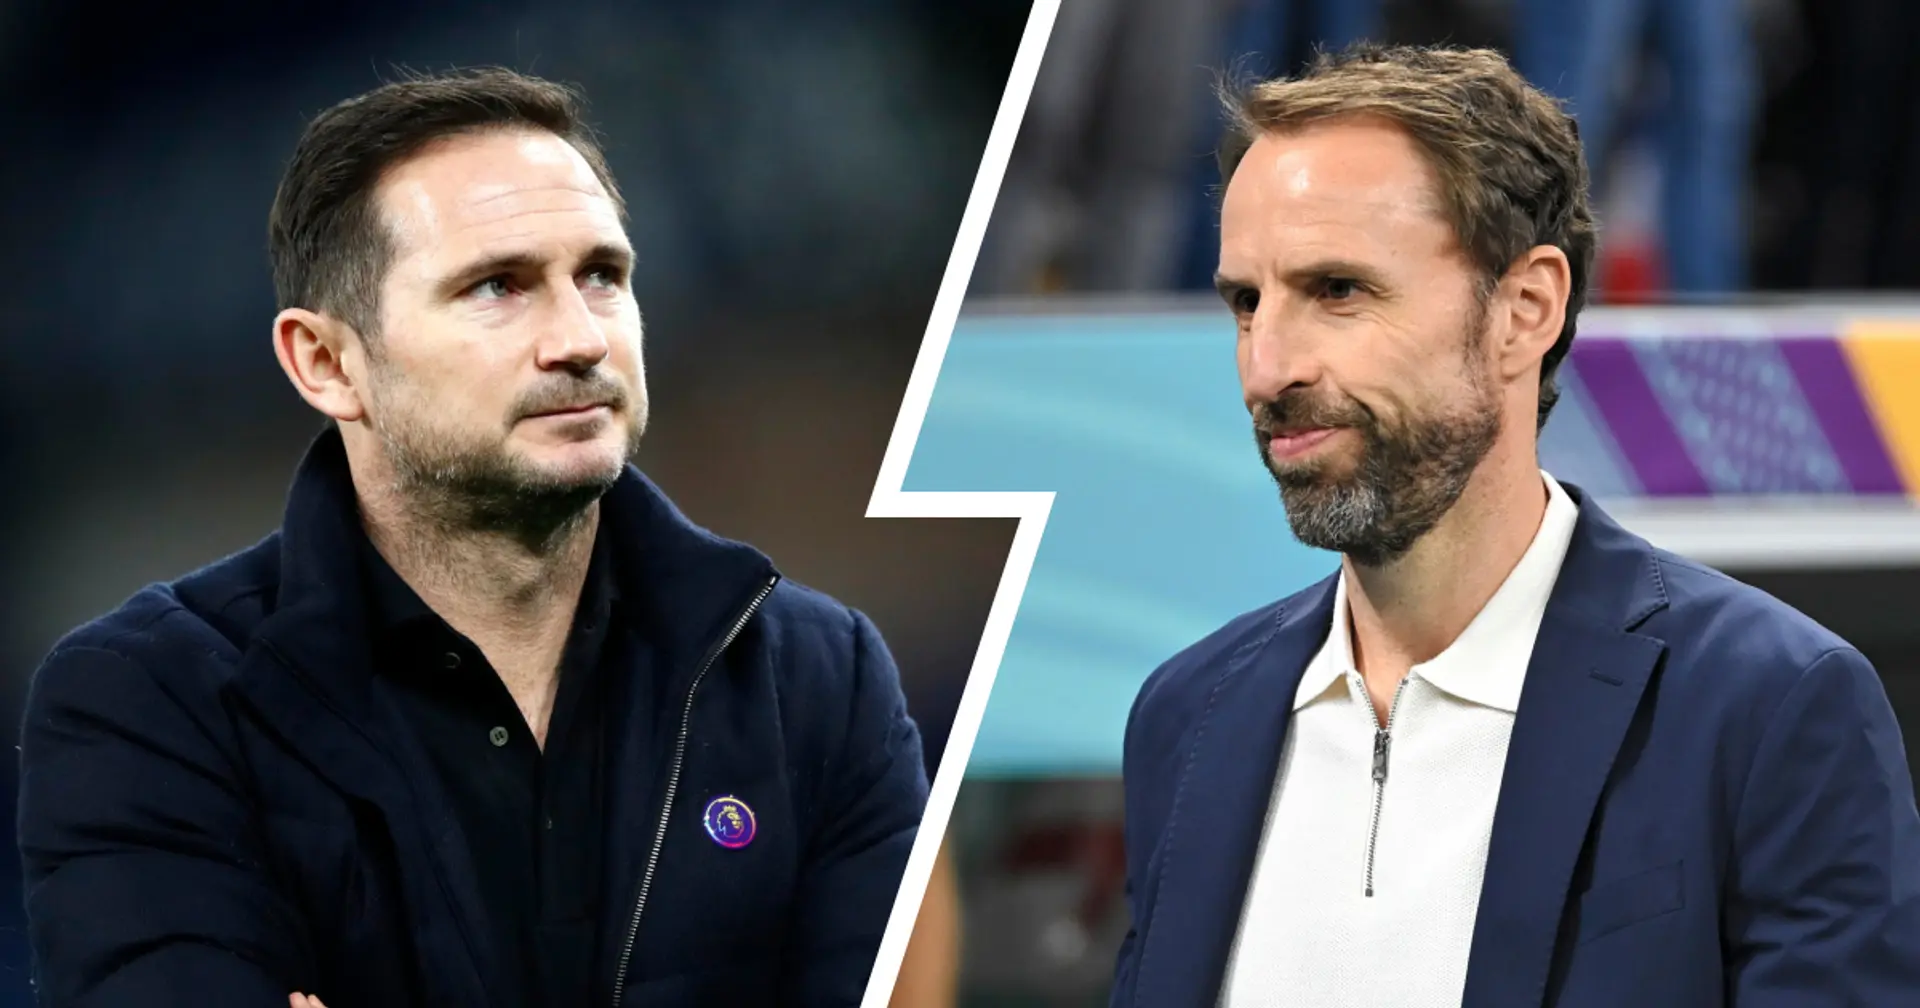 Frank Lampard could be considered for England job if Gareth Southgate resigns - Daily Mail